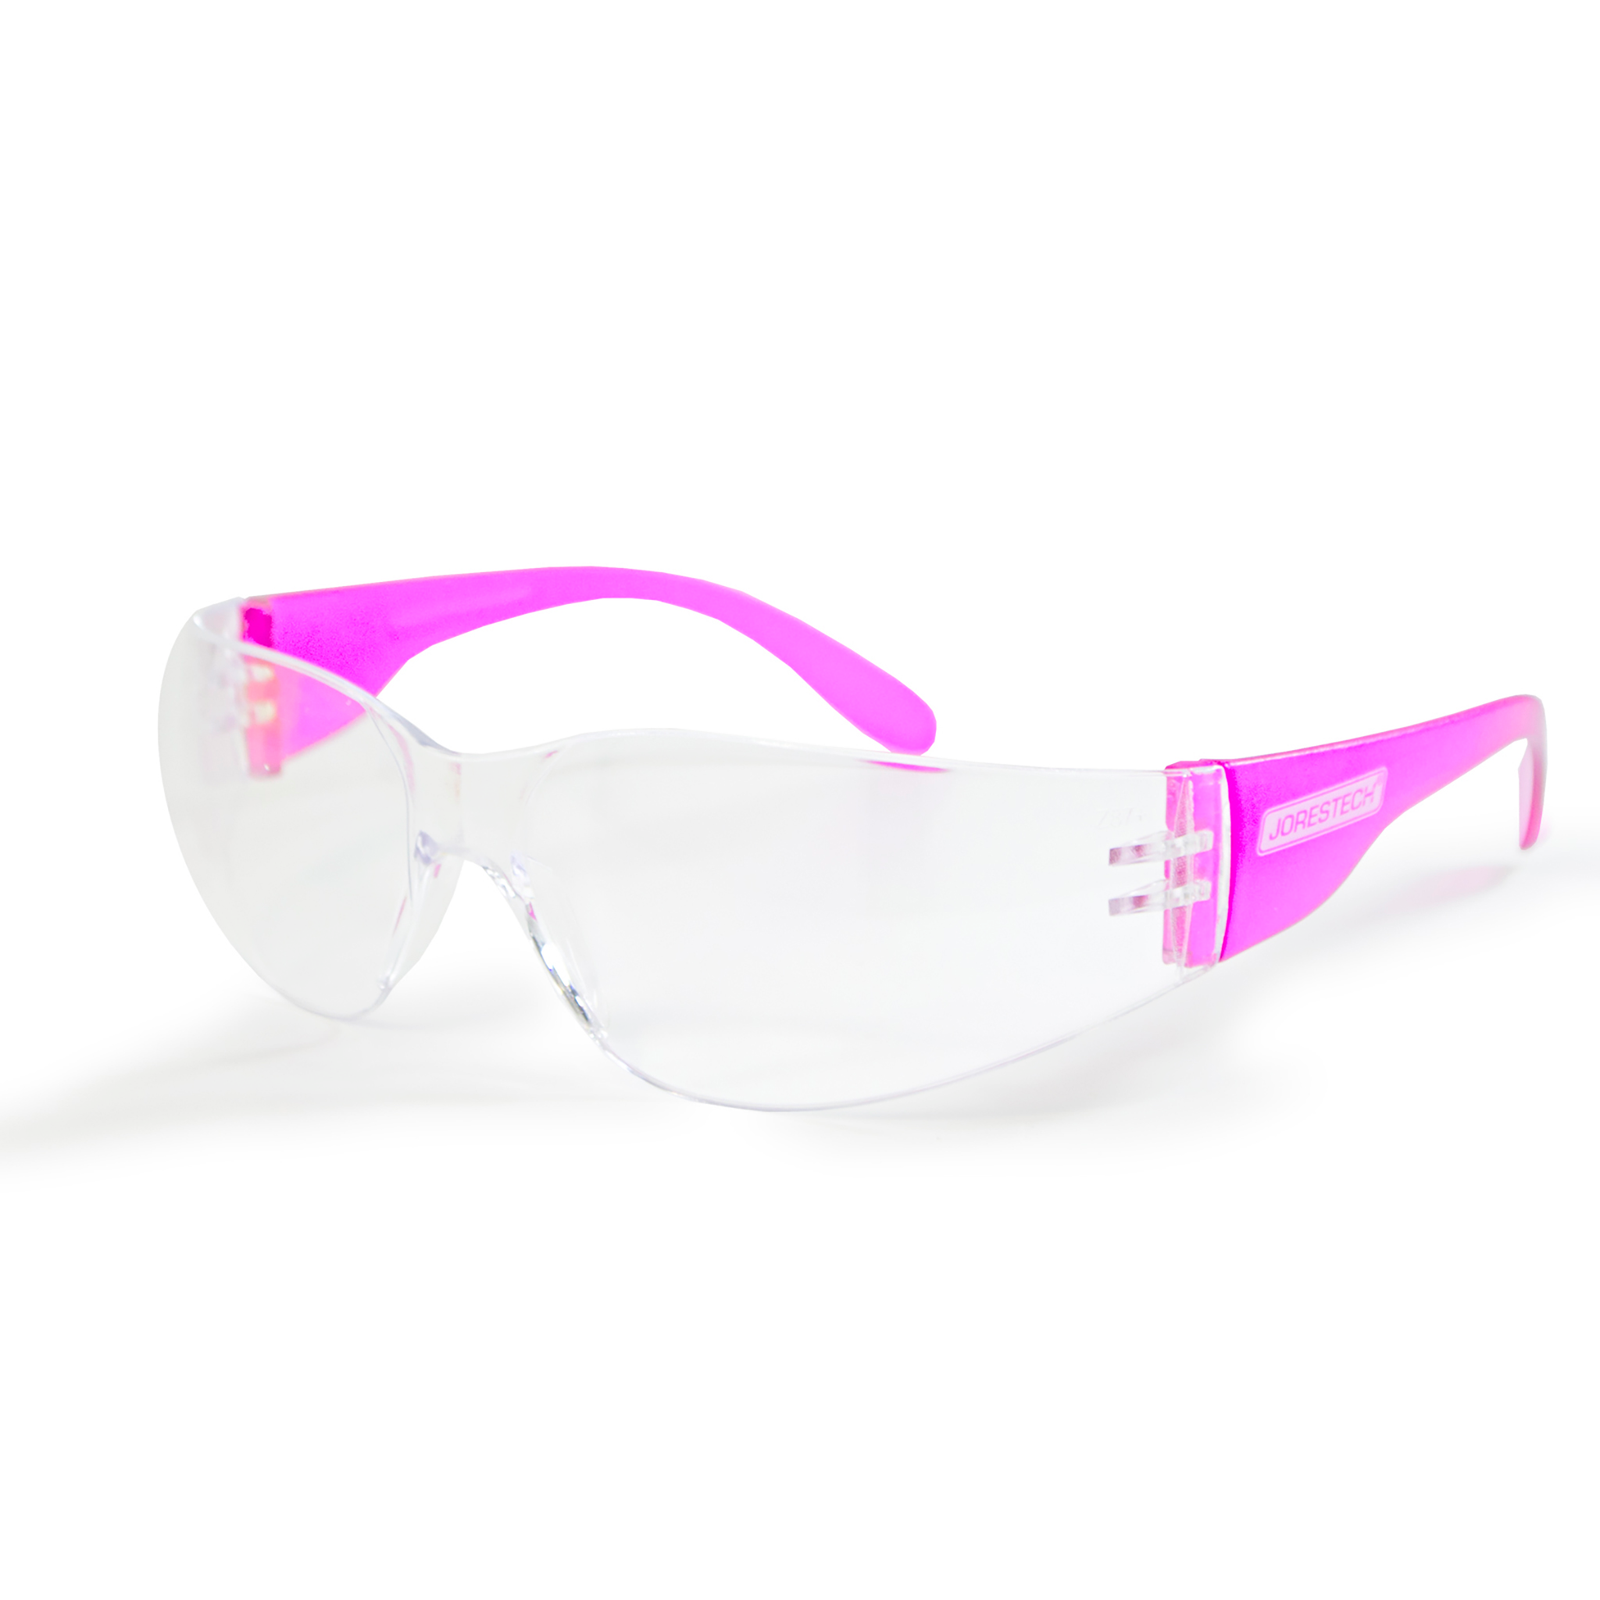 Clear safety glasses for high impact protection with colored pink temples